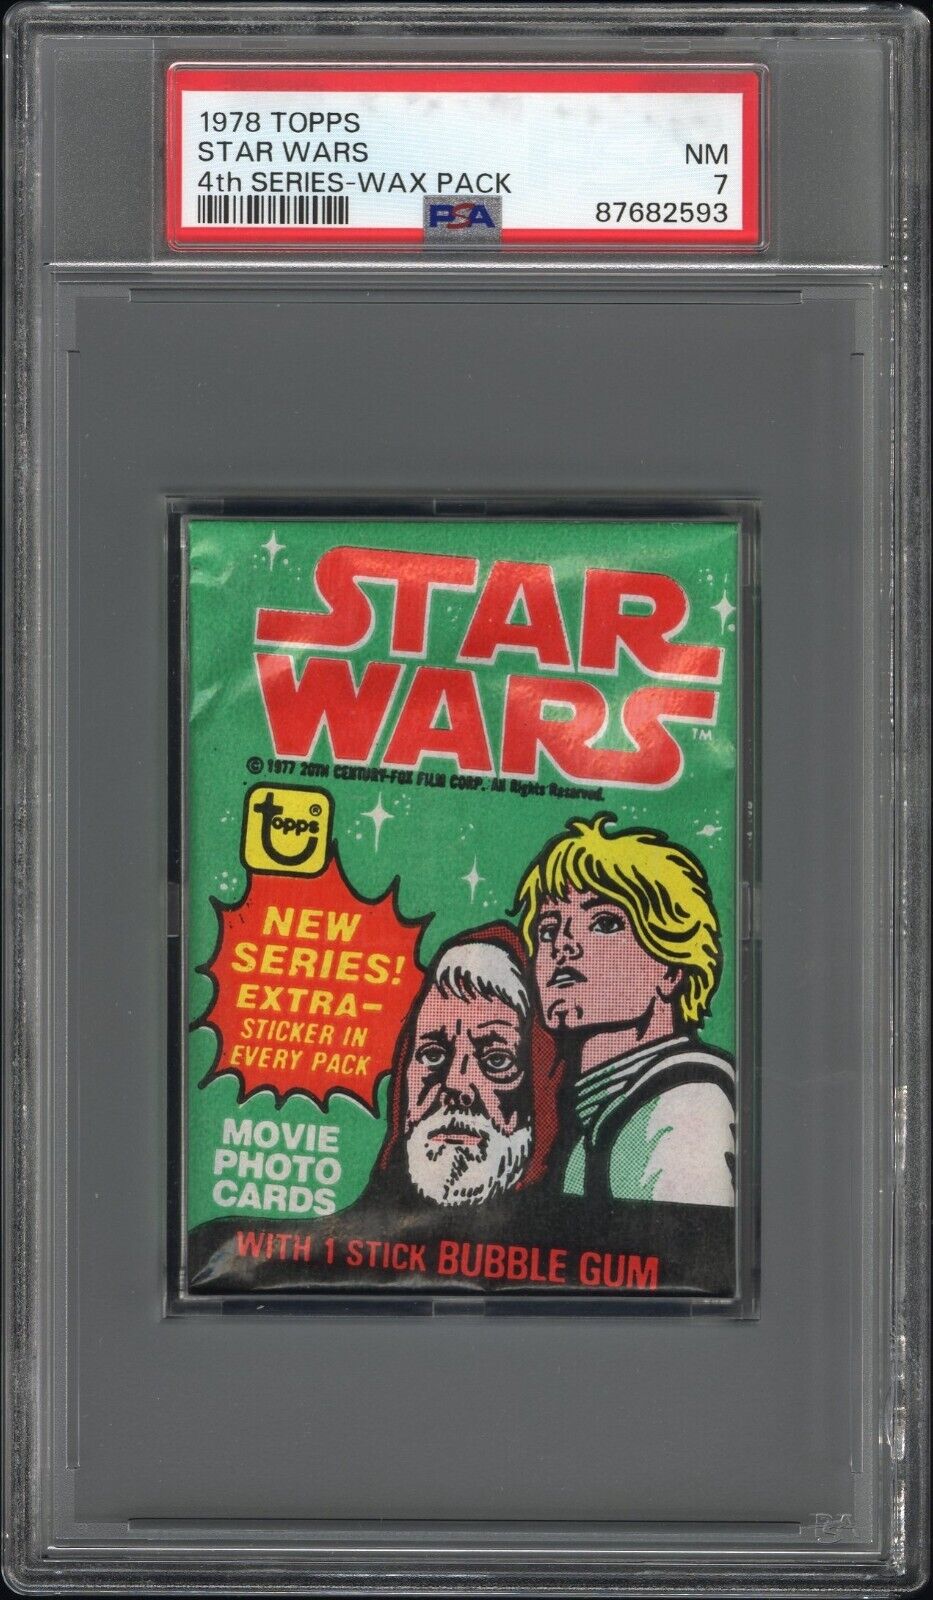 1977-78 Topps Star Wars 4th Series Wax Pack Sealed PSA 7 NM